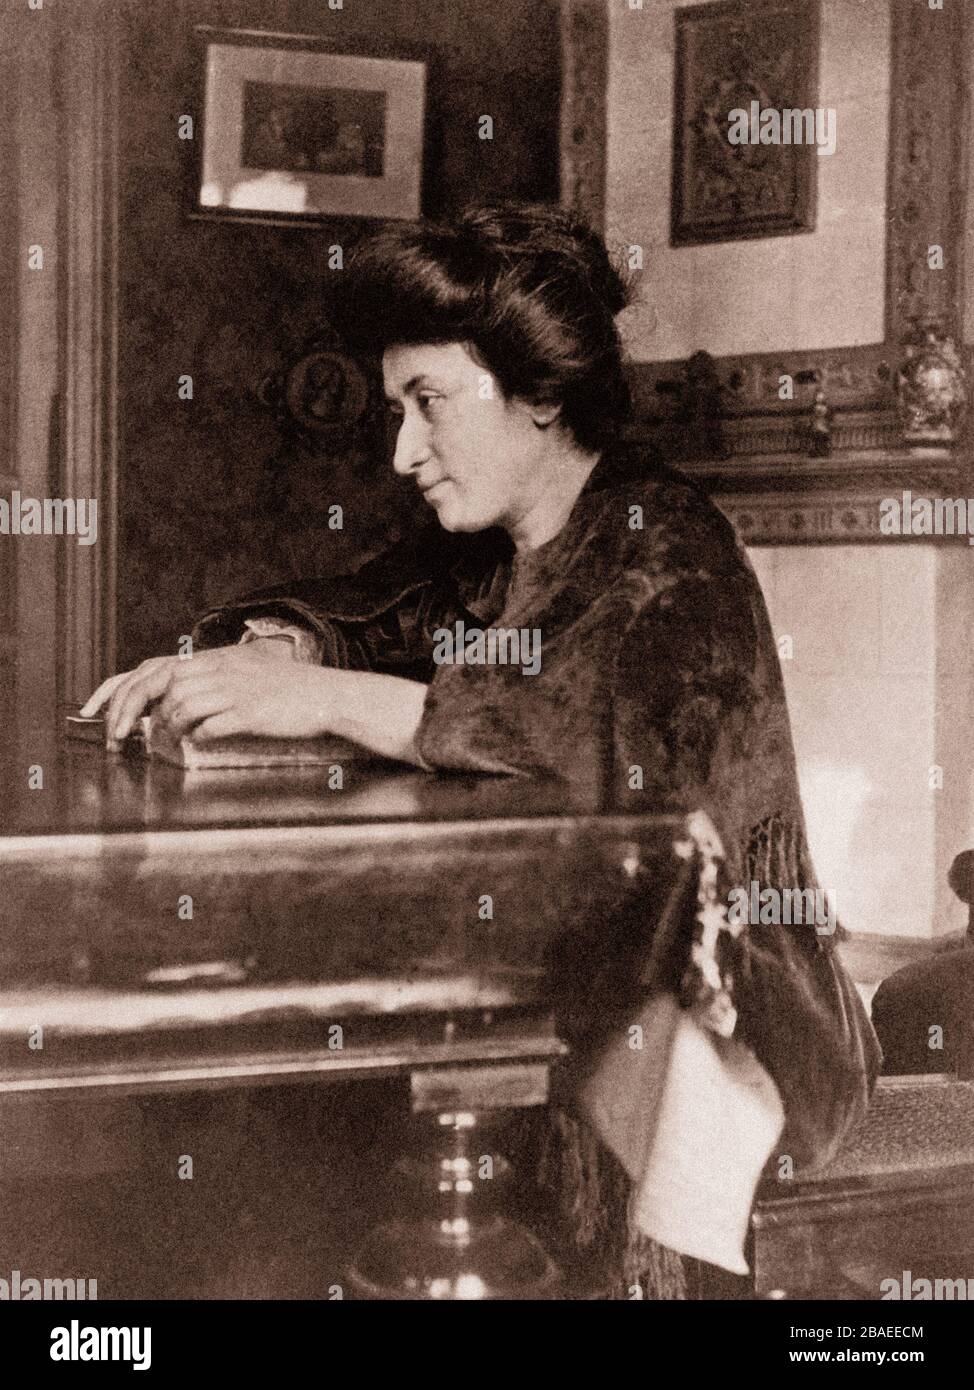 Rosa Luxemburg (1871 – 1919) was a Polish Marxist, philosopher, economist, anti-war activist and revolutionary socialist who became a naturalized Germ Stock Photo